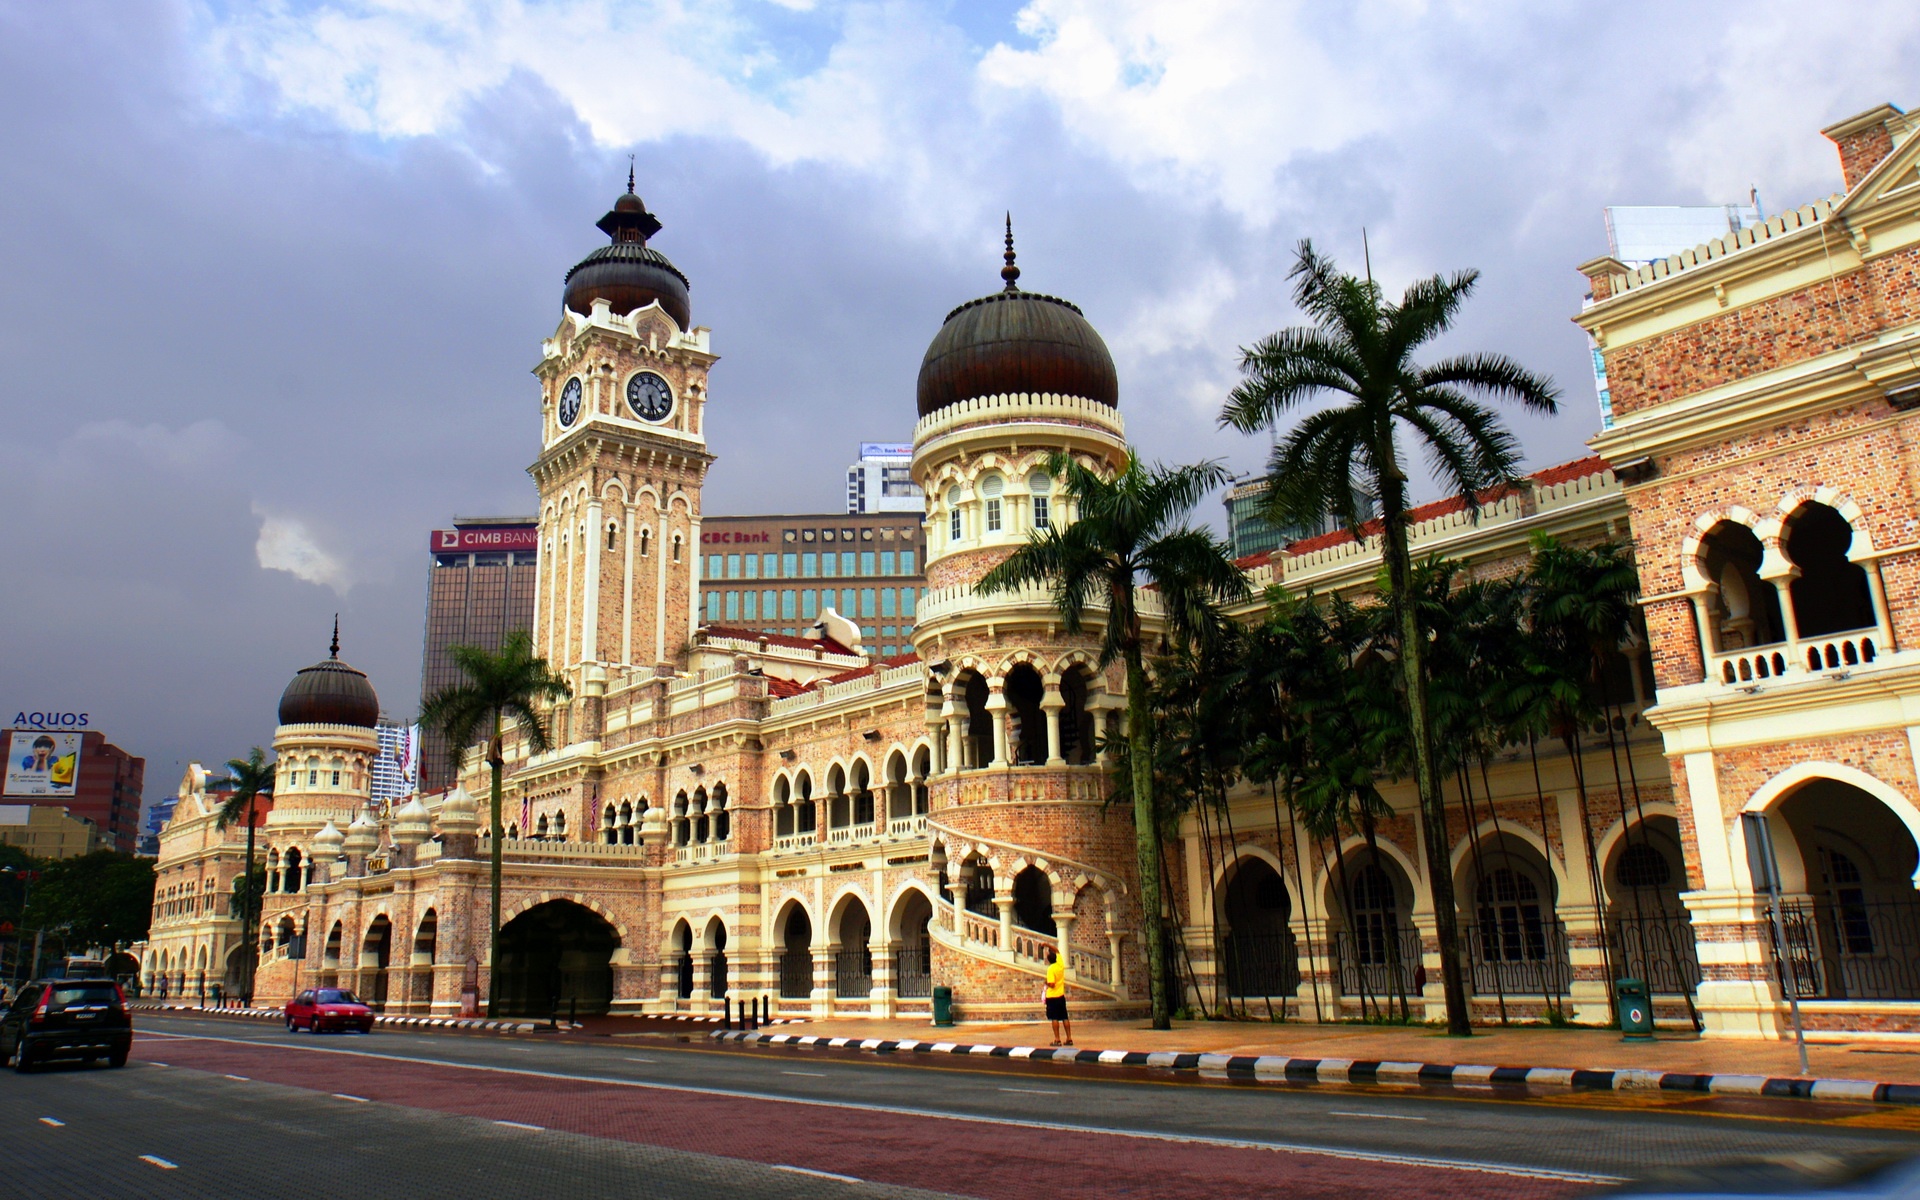 Amazing Sultan Abdul Samad Building Pictures & Backgrounds